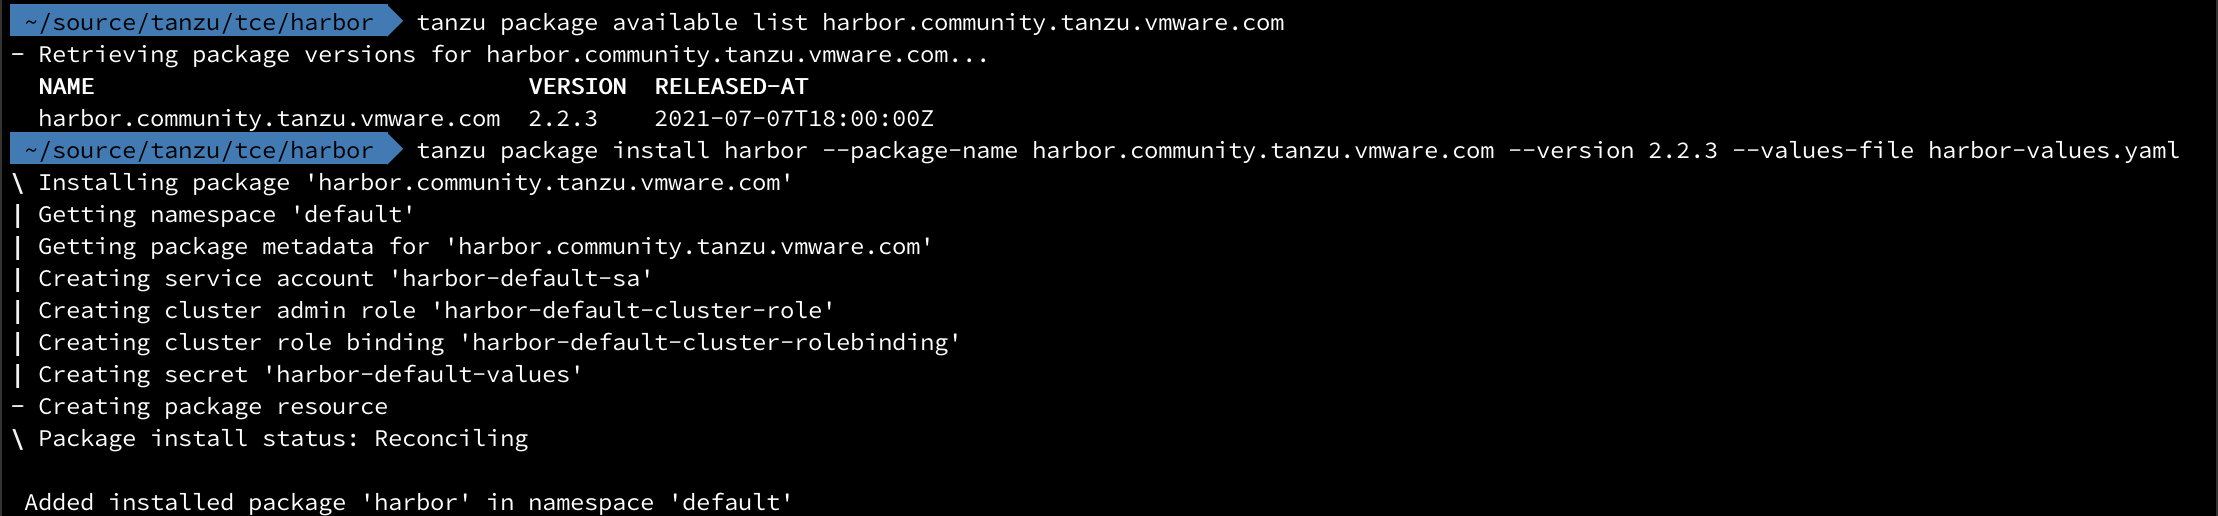 Deploy Harbor from Tanzu package